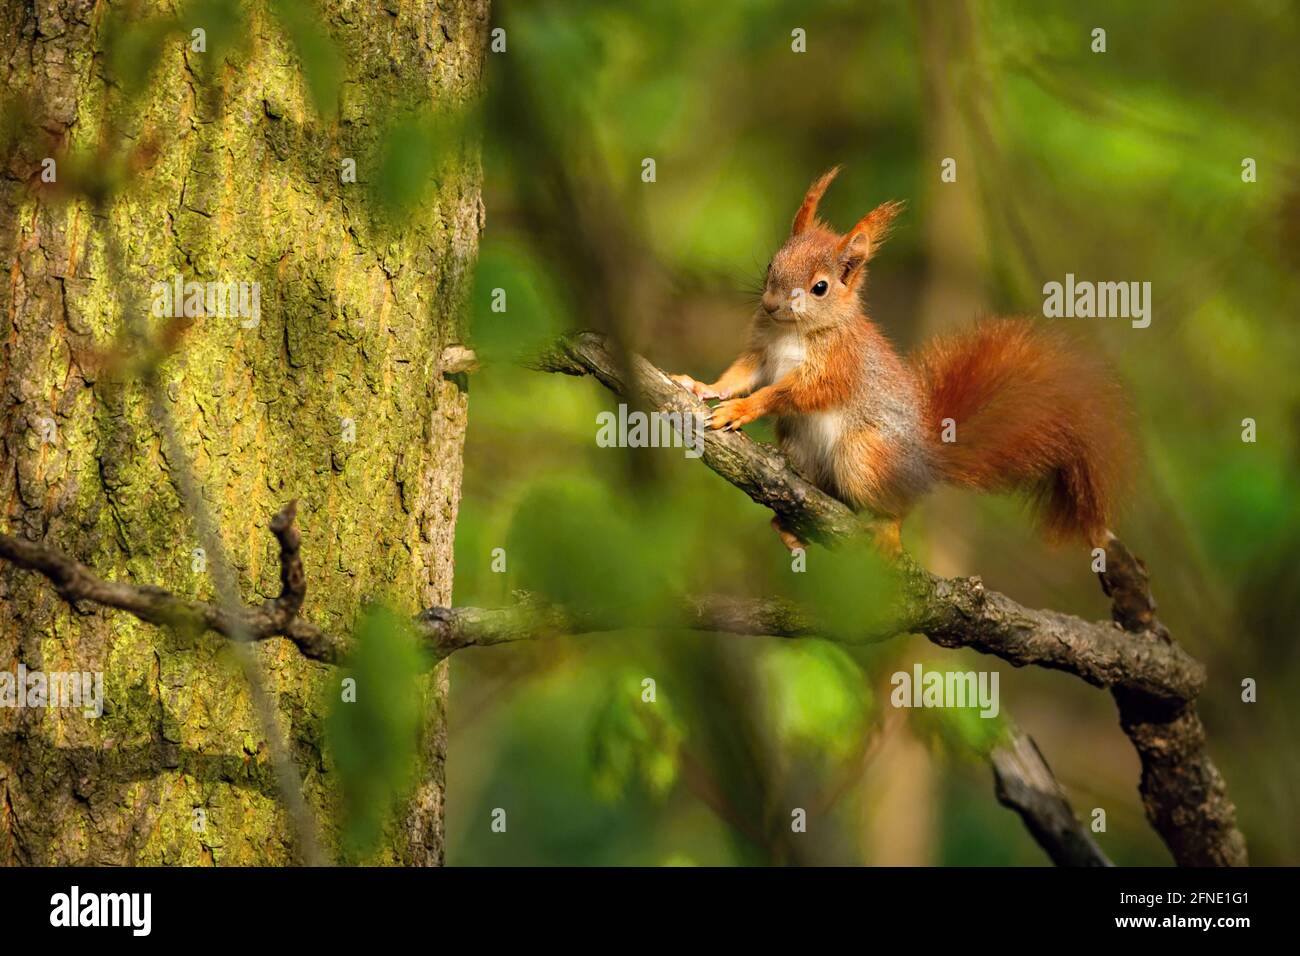 A cute young red European squirrel with fluffy tail sitting on a branch surrounded by green leaves and trees. Sunny spring day in the forest. Stock Photo